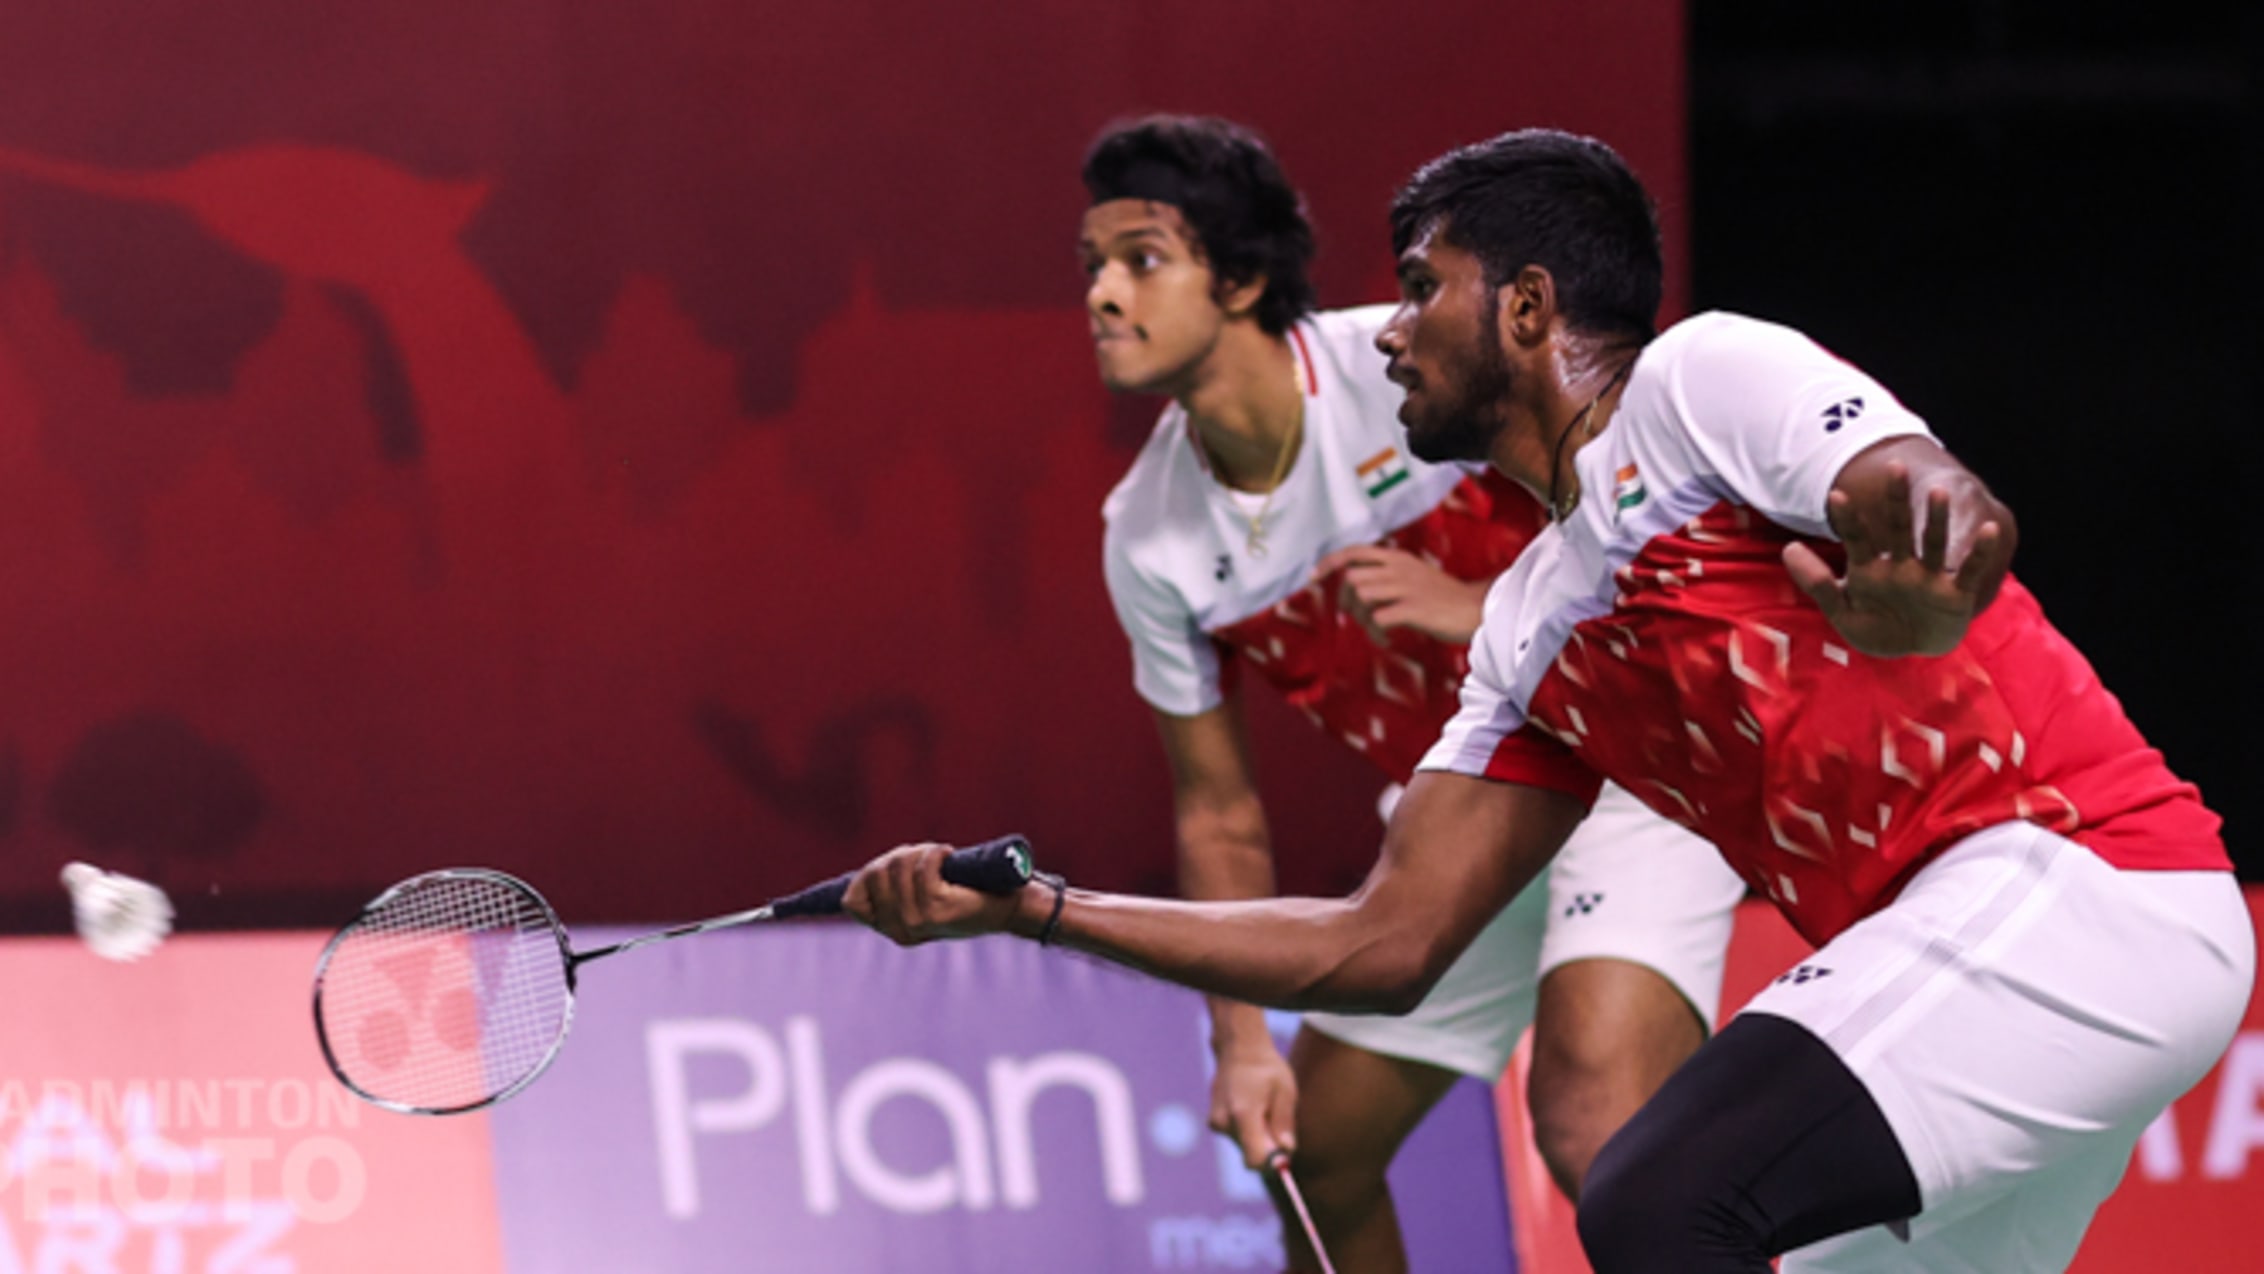 Toyota Thailand Open live PV Sindhu, HS Prannoy and other Indian badminton players in action, get match updates, brief scores and results